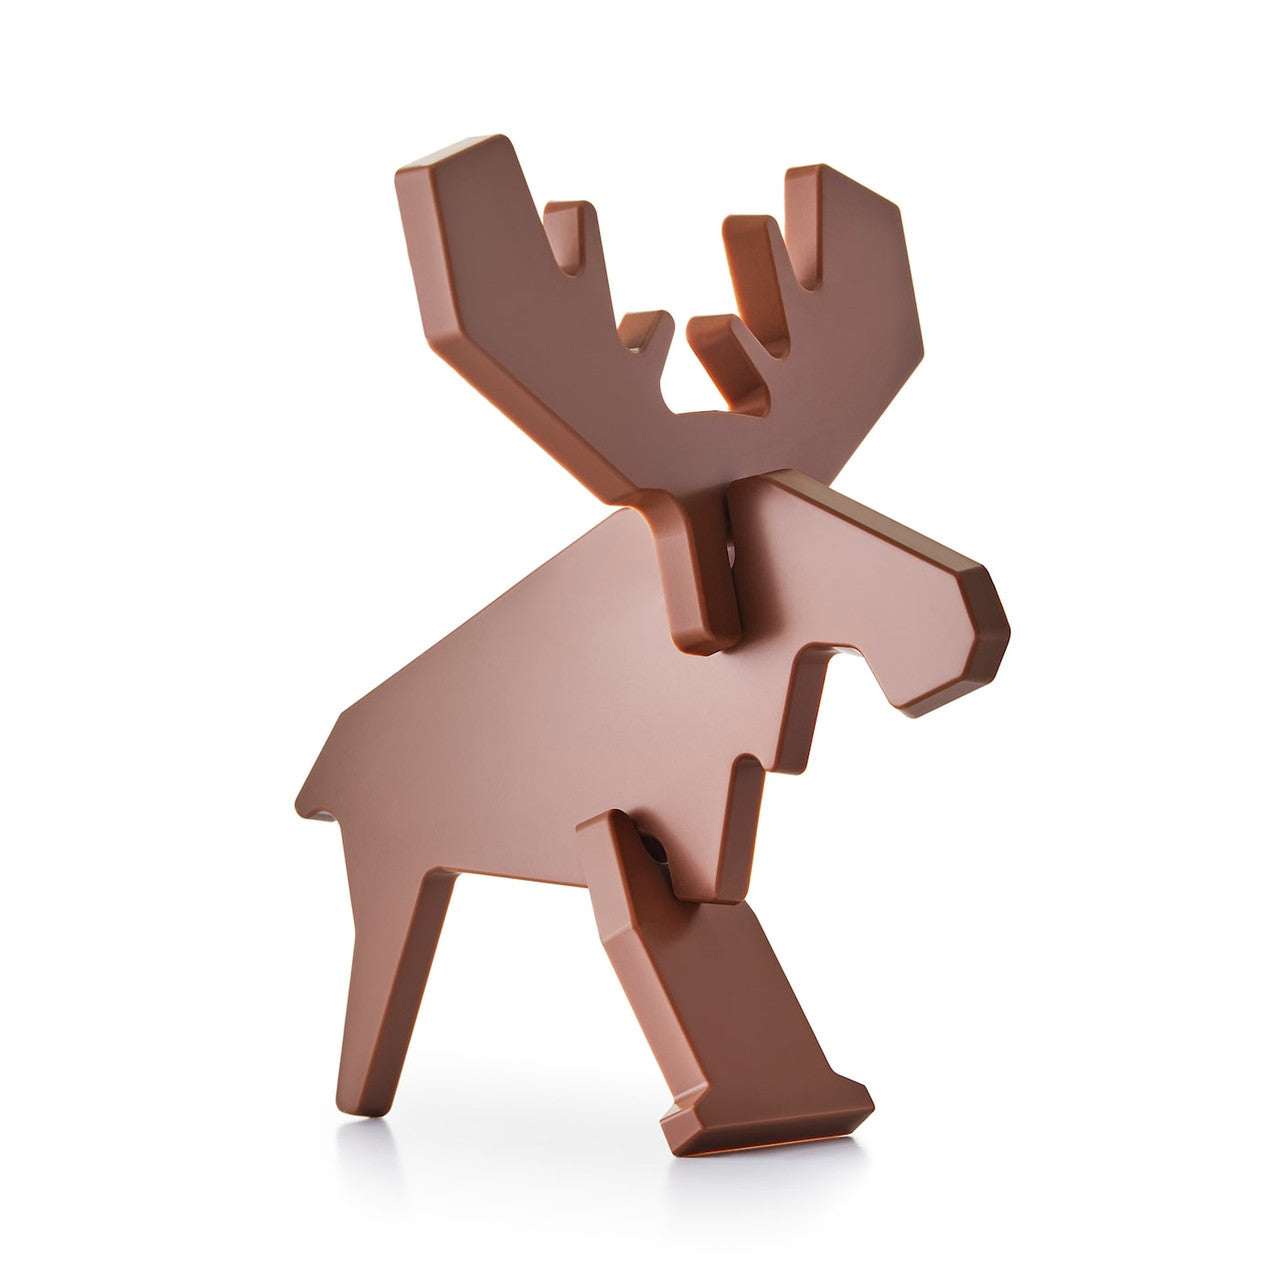 IKEA BELÖNING Self-Assembly Milk Chocolate Moose, 90g/3.15 oz. {Imported from Canada}